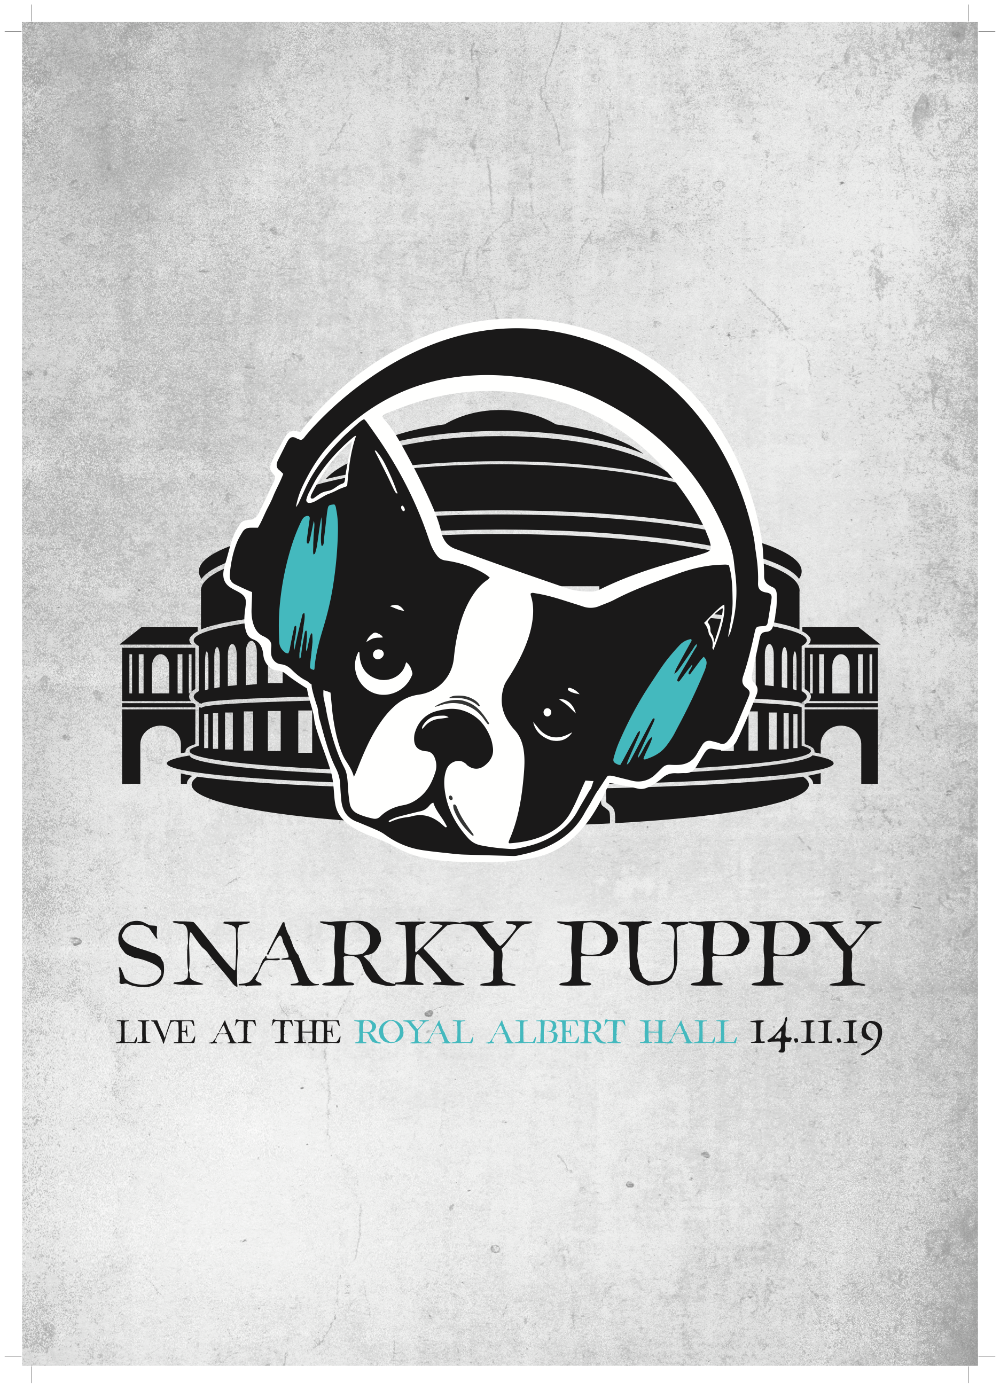 Snarky Puppy: Live At The Royal Albert Hall - A3 Art Print - Inc Free download!